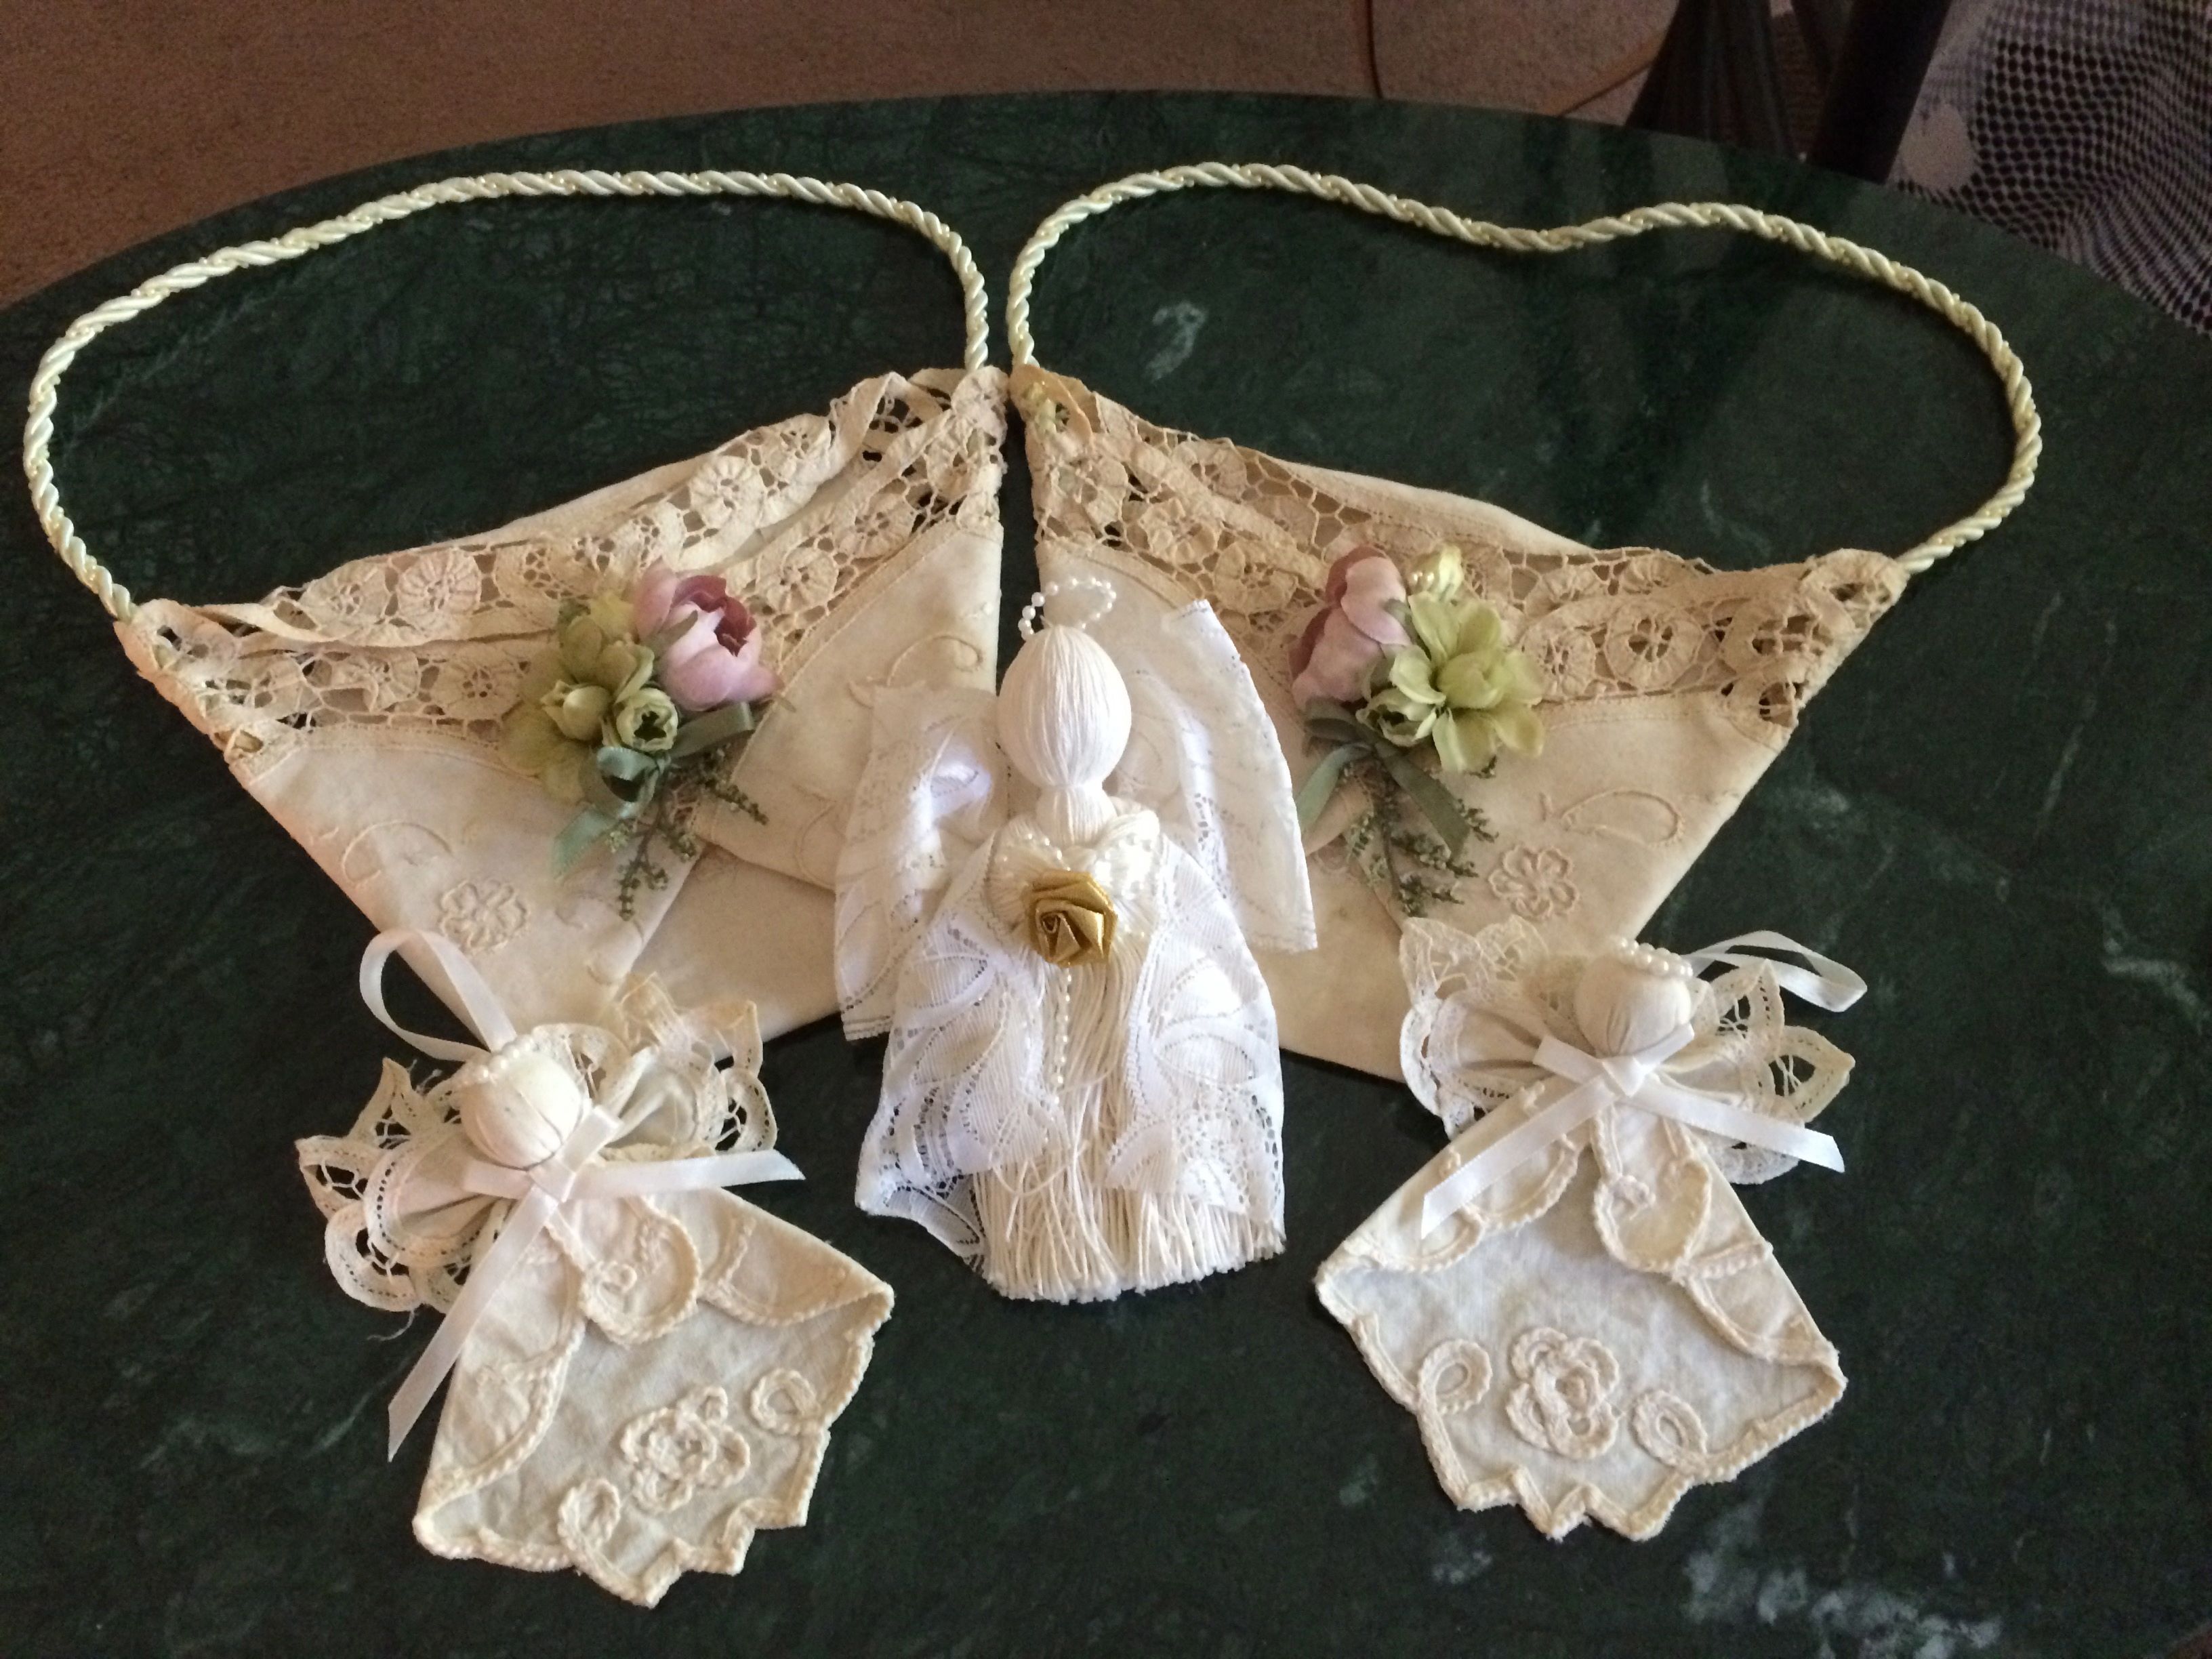 Vintage 1980s Bridesmaids’ Gifts or Bridal Gifts - Angels & Sachet Bags by Annabelle\'s Angels